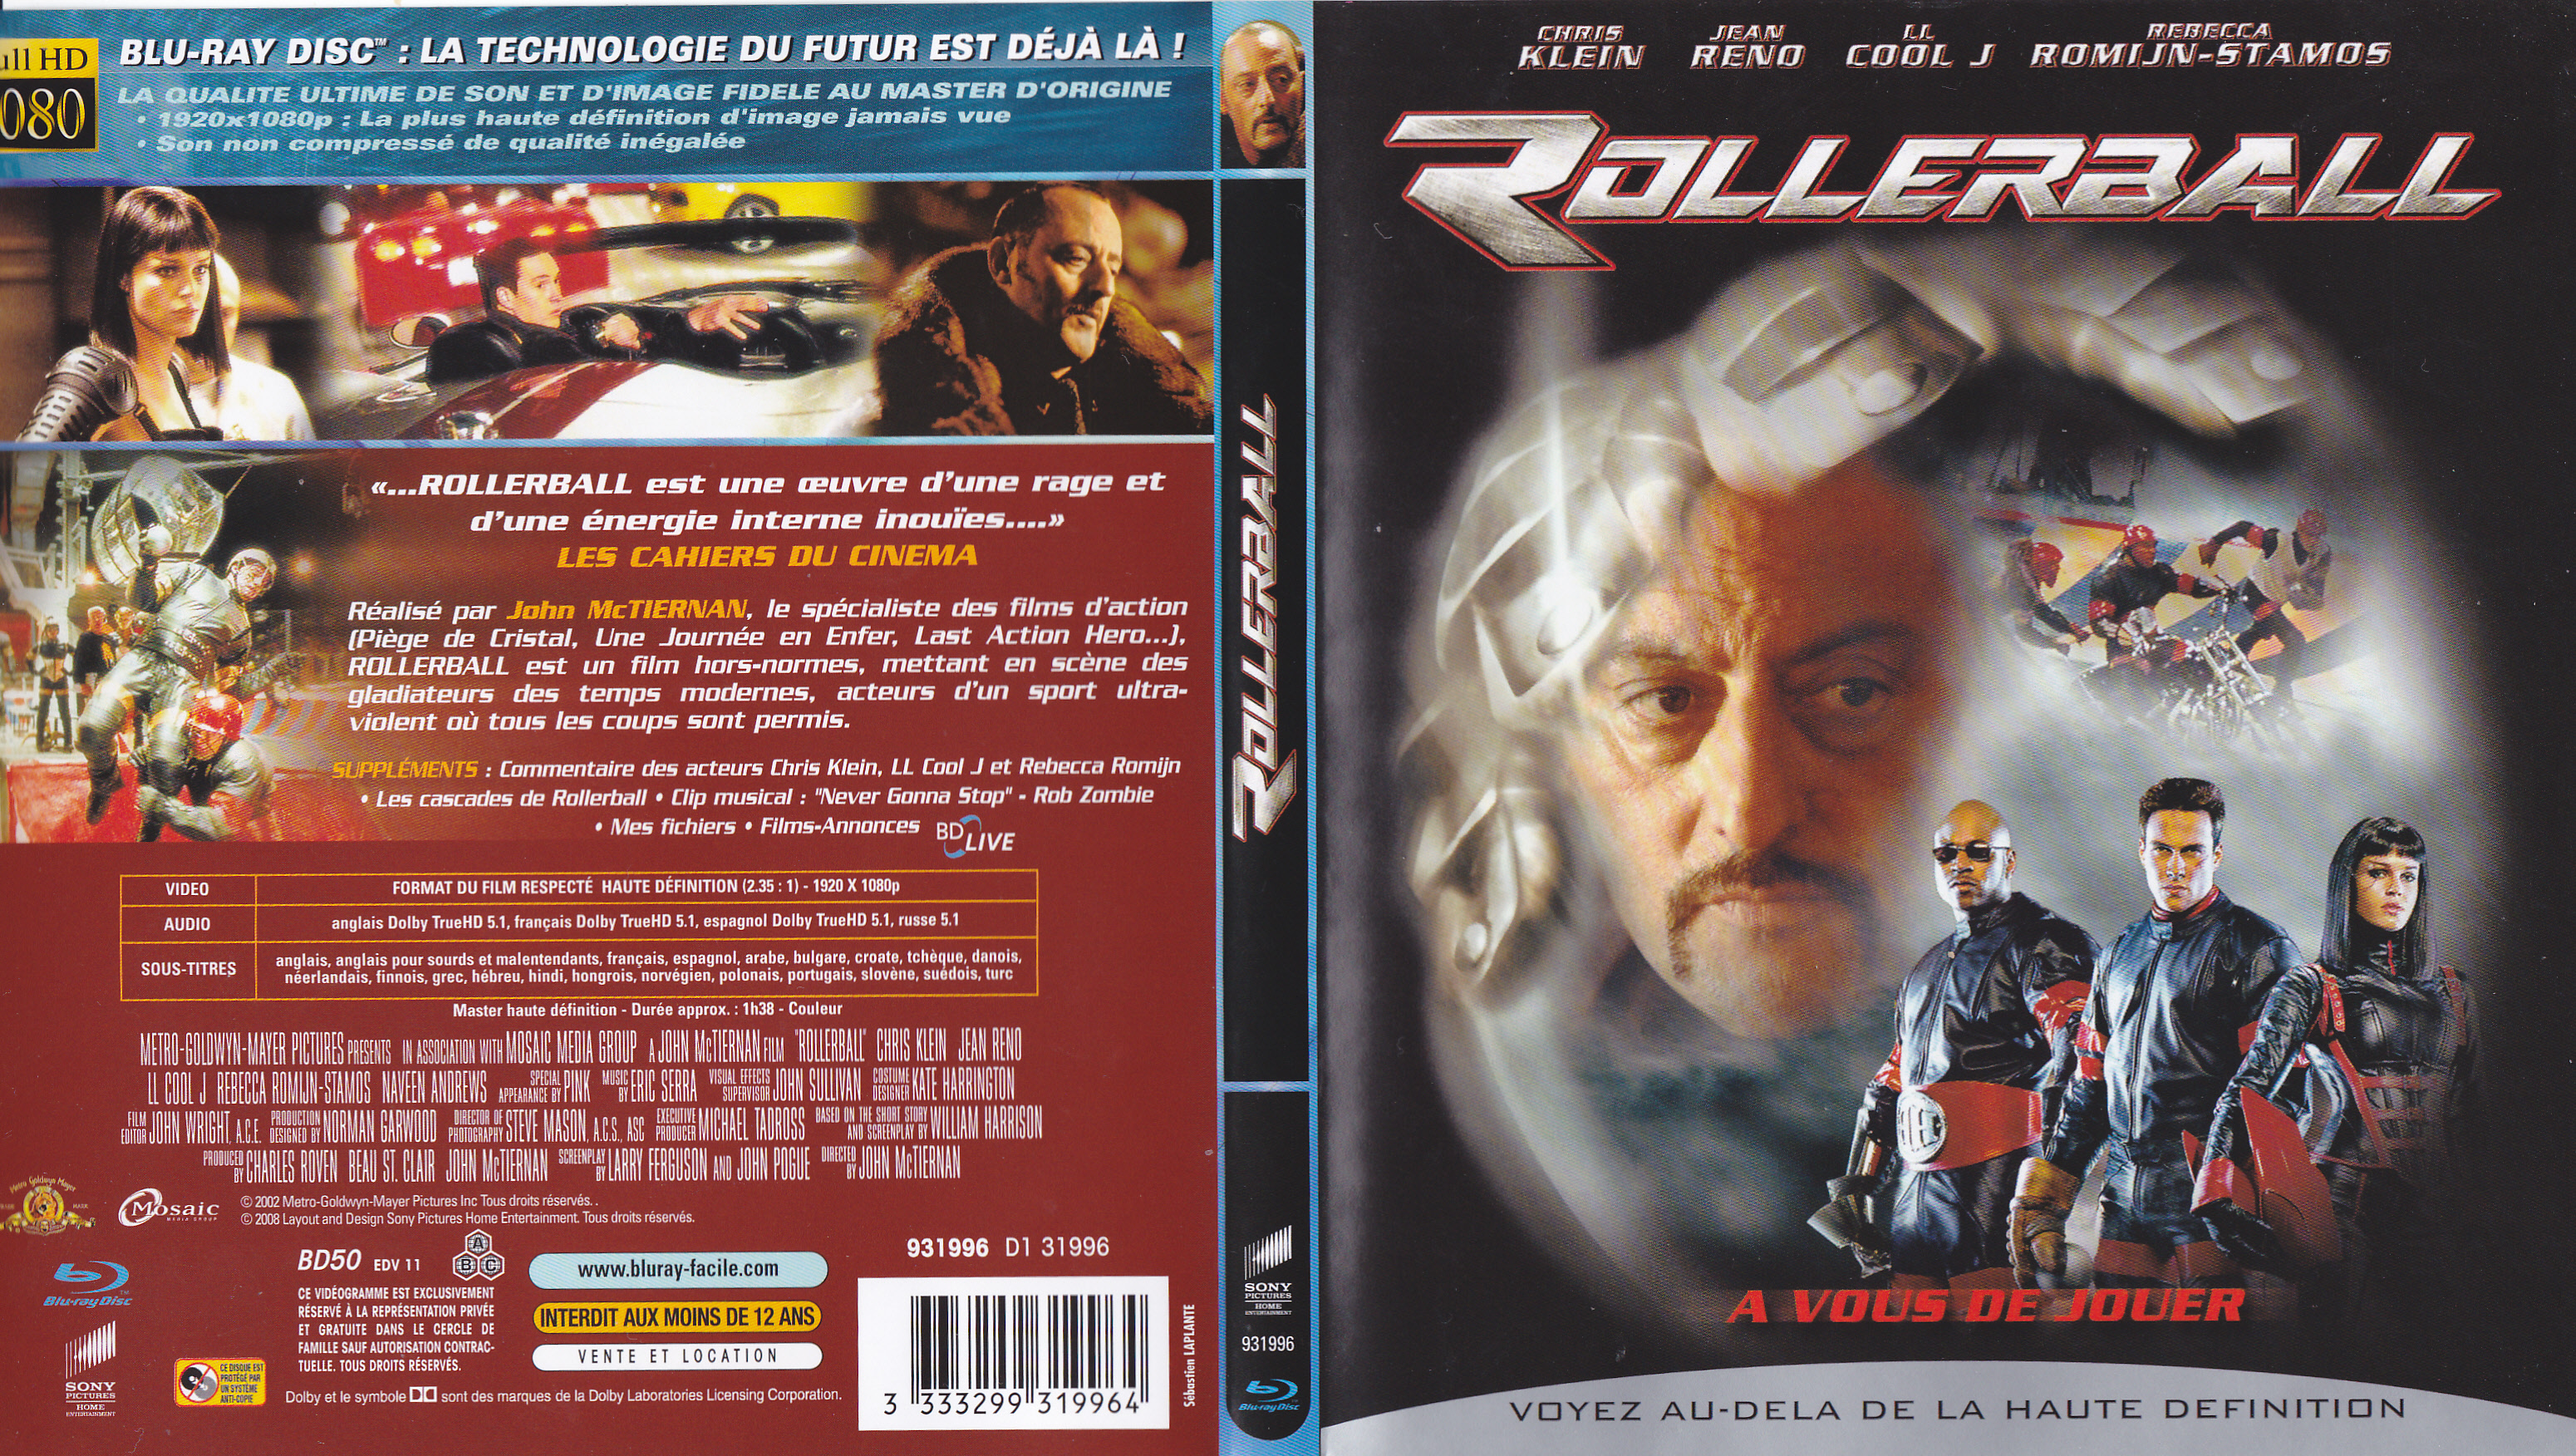 Jaquette DVD Rollerball (2002) (BLU-RAY)